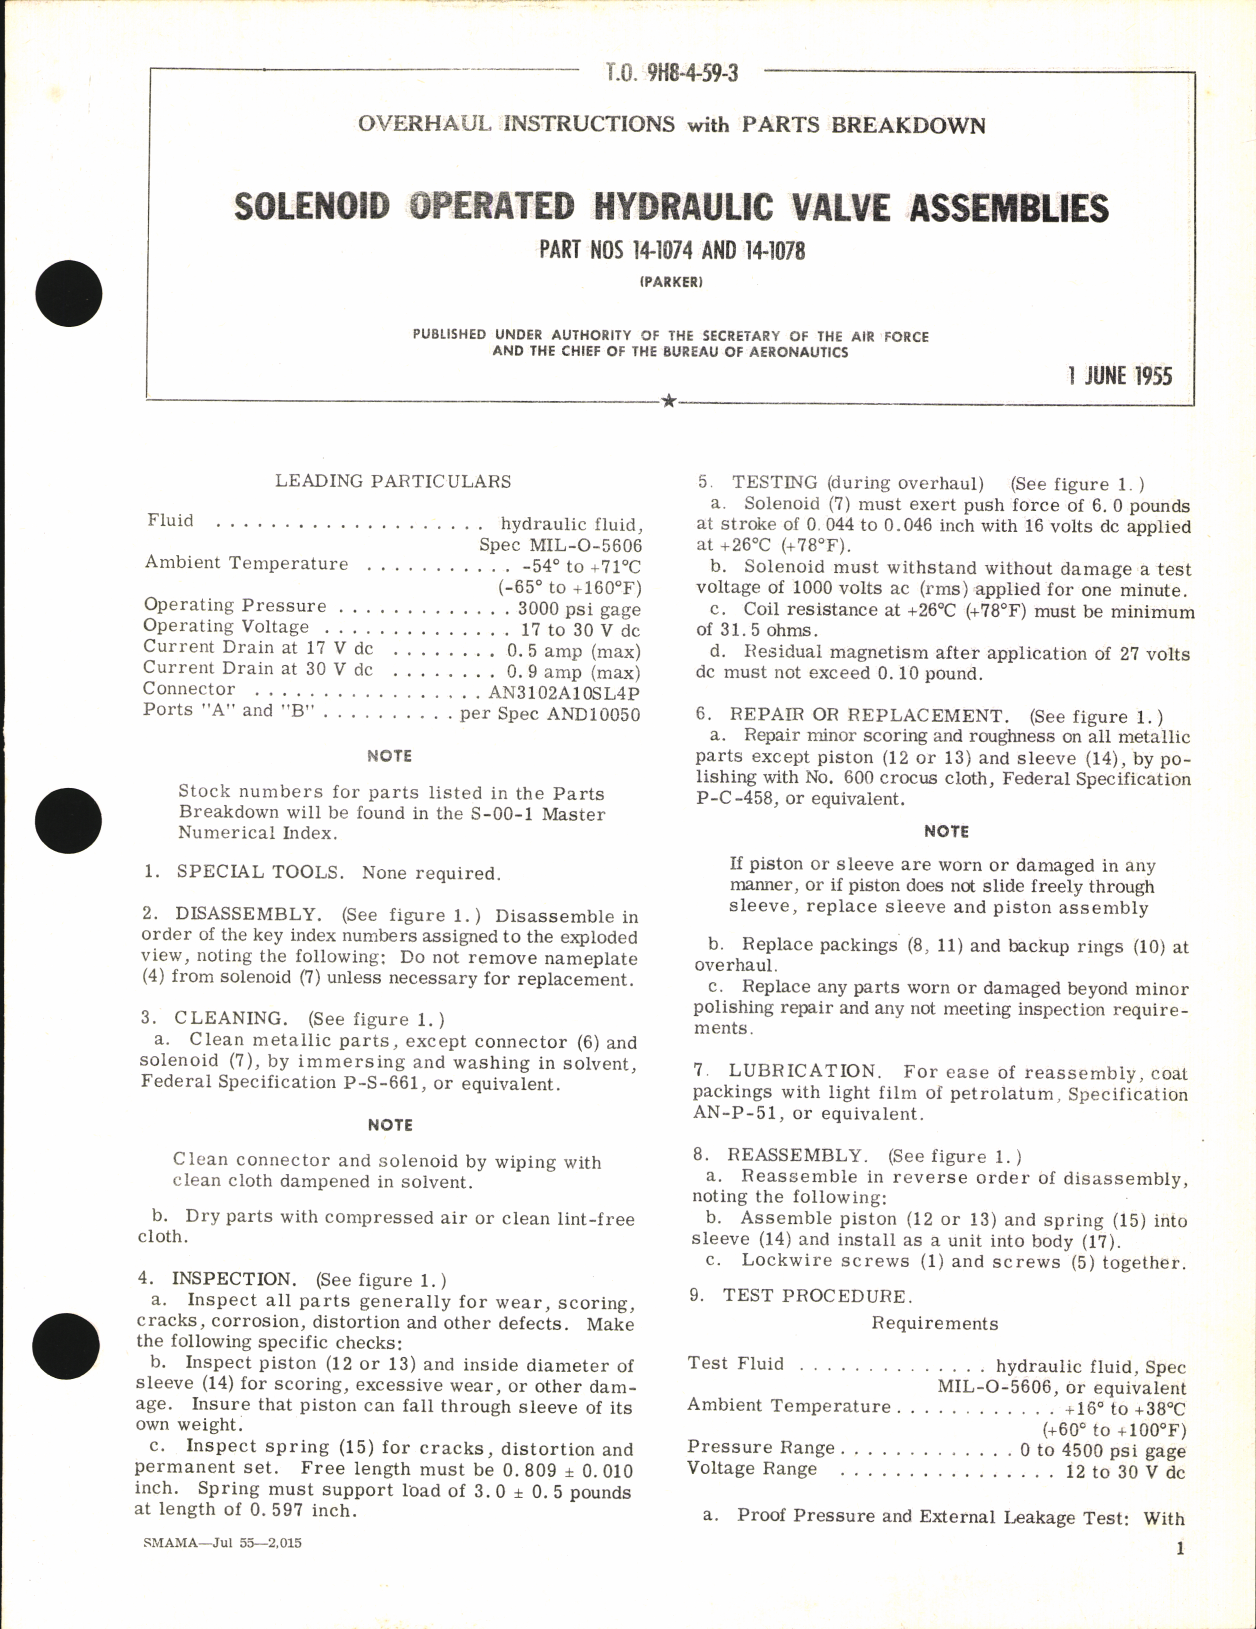 Sample page 1 from AirCorps Library document: Overhaul Instructions with Parts Breakdown for Solenoid Operated Hydraulic Valve Assemblies 